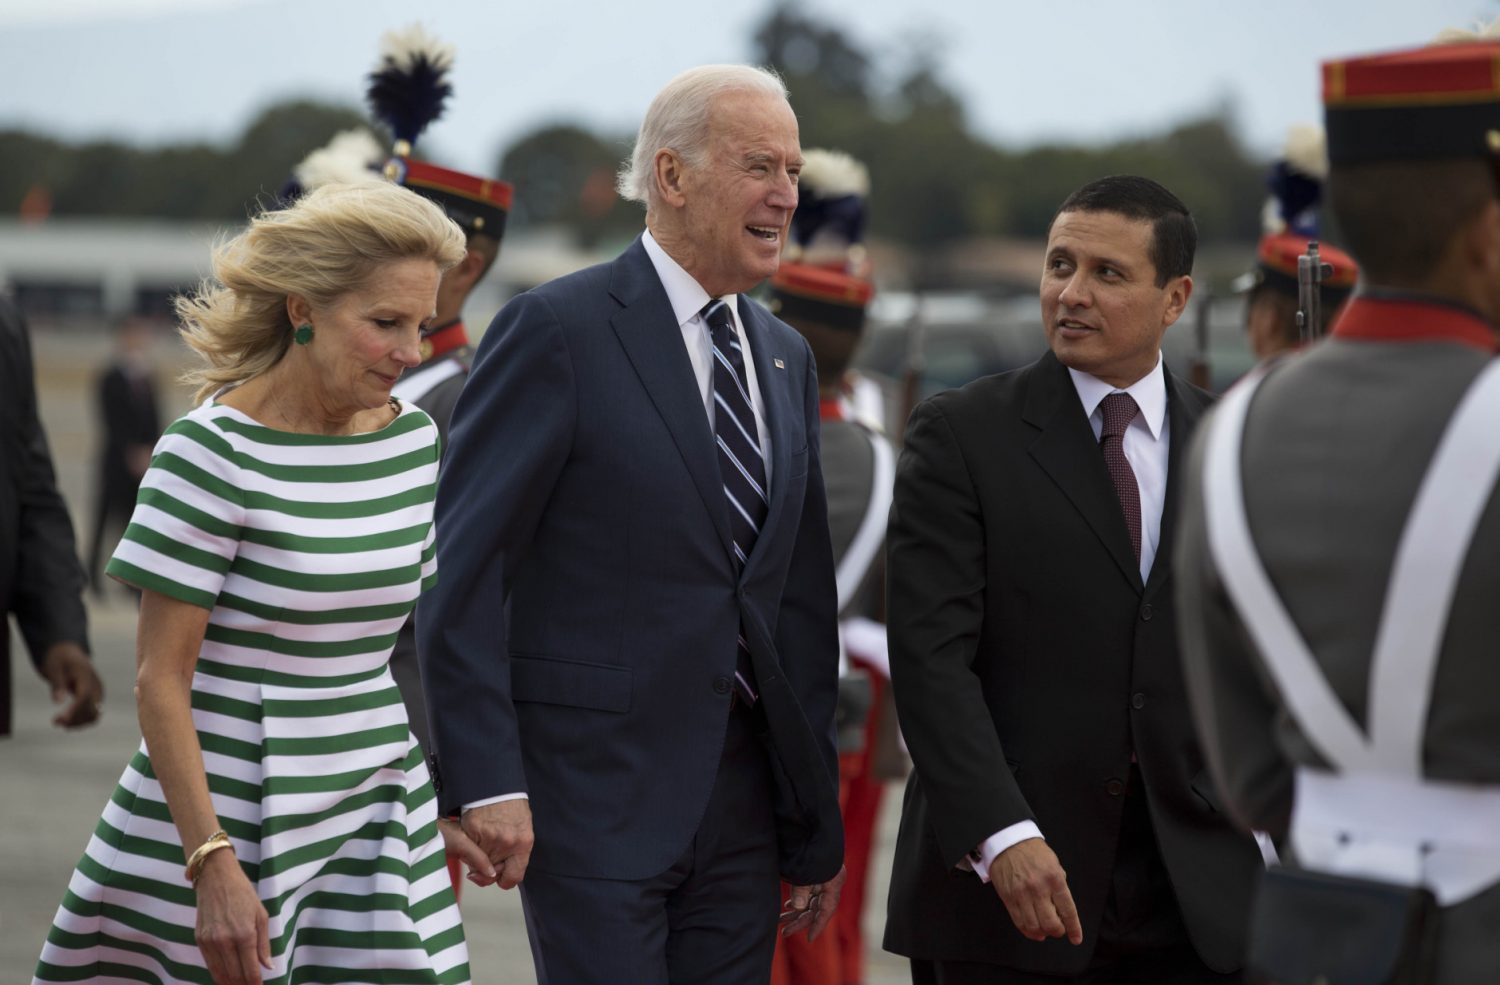 U.S. Vice President Joe Biden, center, and his wife Jill Biden walk with Guatemalan Foreign Minister Carlos Raul Morales after their arrival to an air force base in Guatemala City, Monday, March 2, 2015. Joe Biden is starting a two day trip to meet with the leaders of Guatemala, El Salvador and Honduras regarding immigration issues. (AP Photo/Moises Castillo)